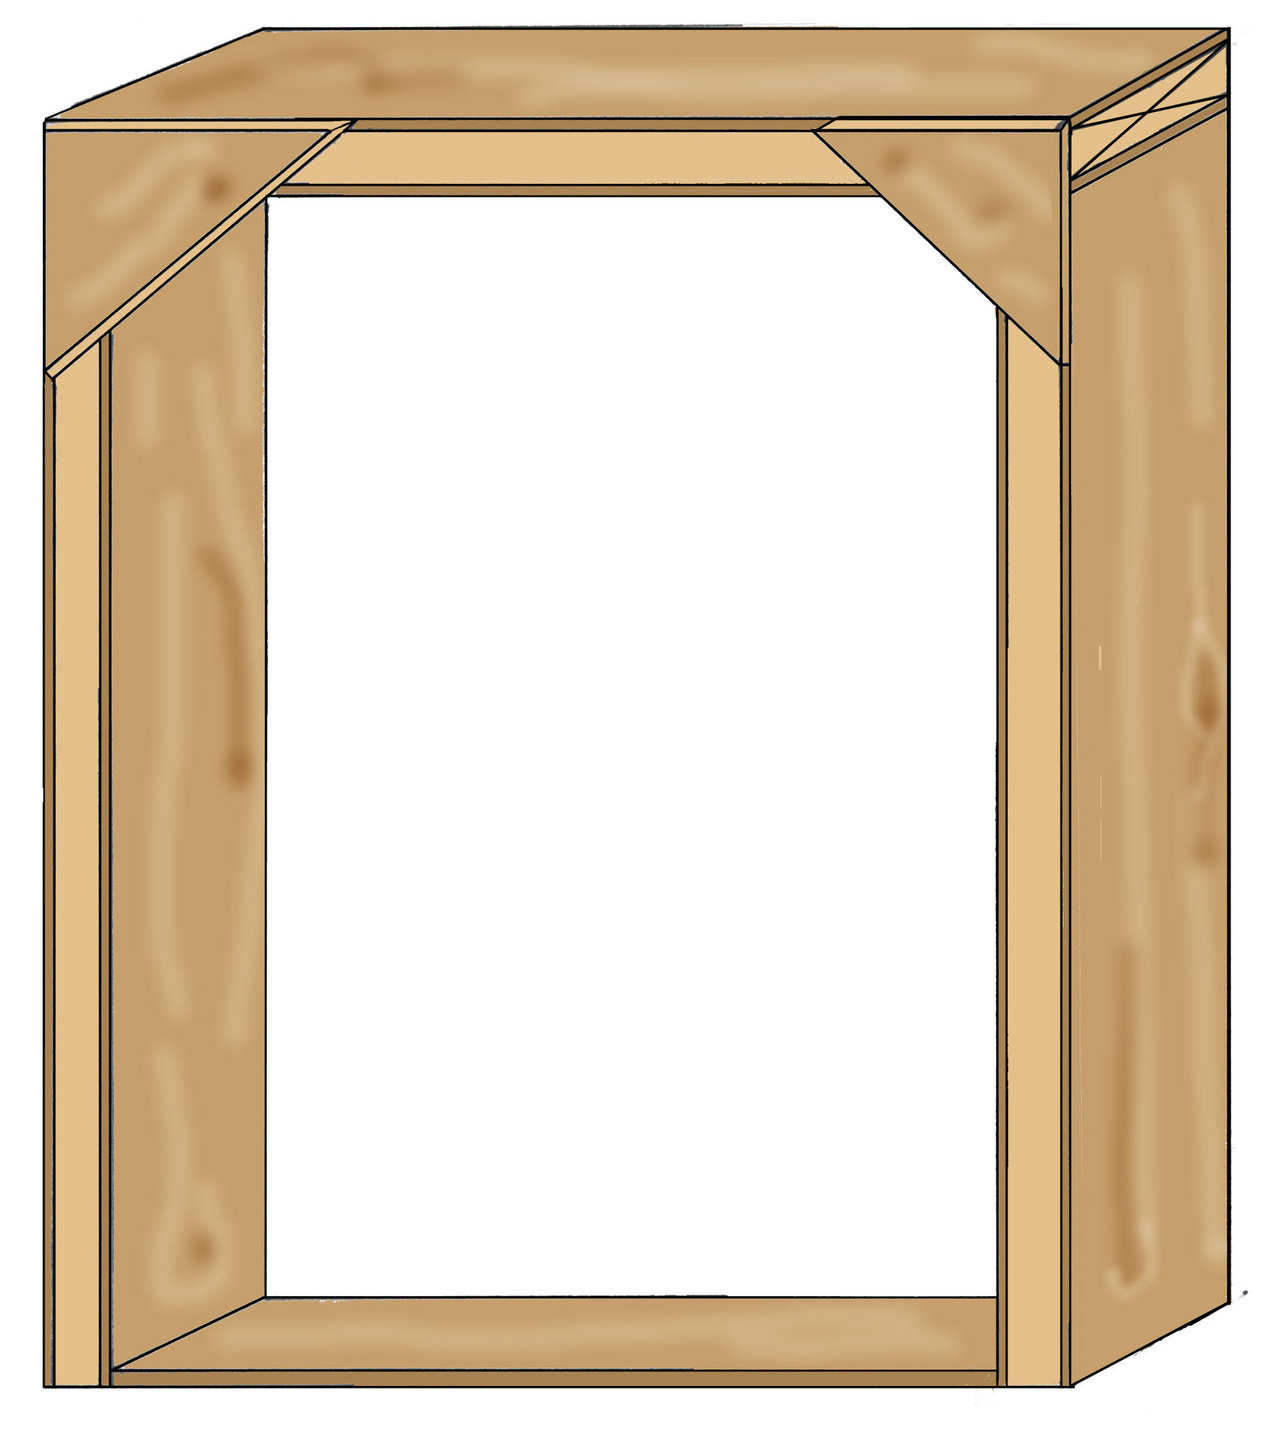 Framing Buck — 1. Before inflation, using pressure treated wood, construct framing bucks with outside dimensions to match the front face of the augment.